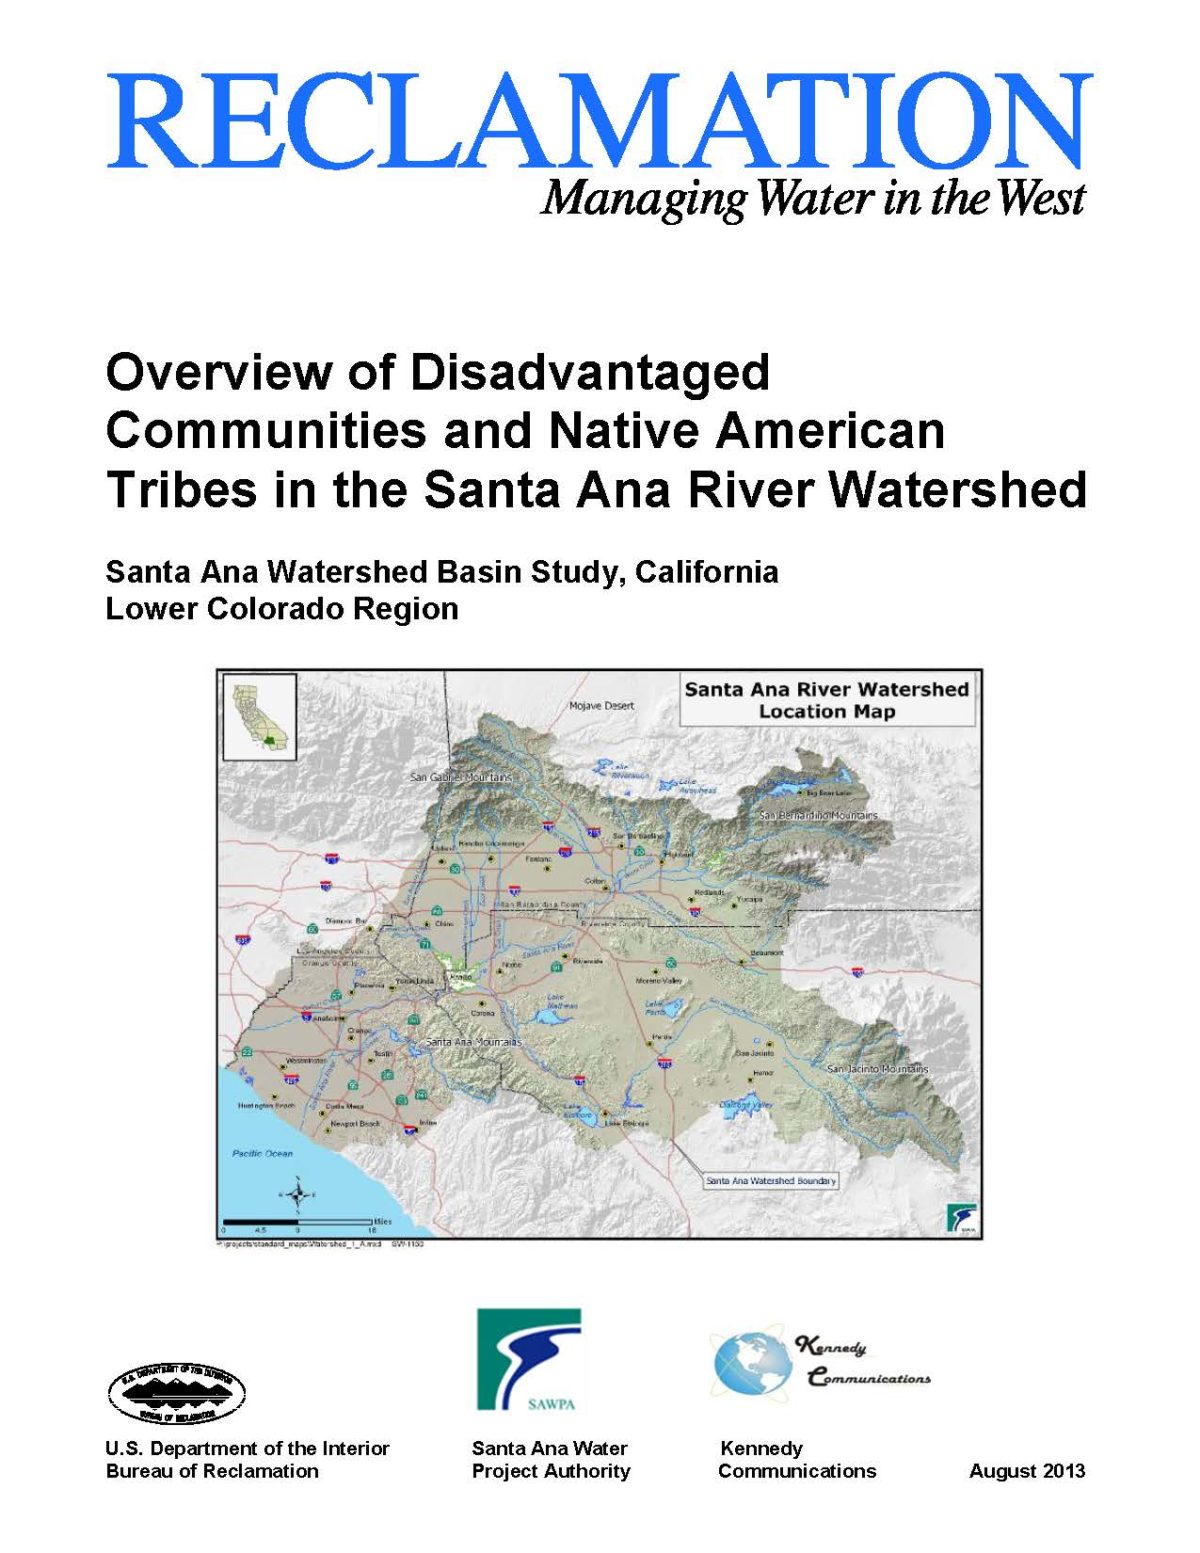 Overview of Disadvantaged Communities and Native American Tribes in the Santa Ana River Watershed